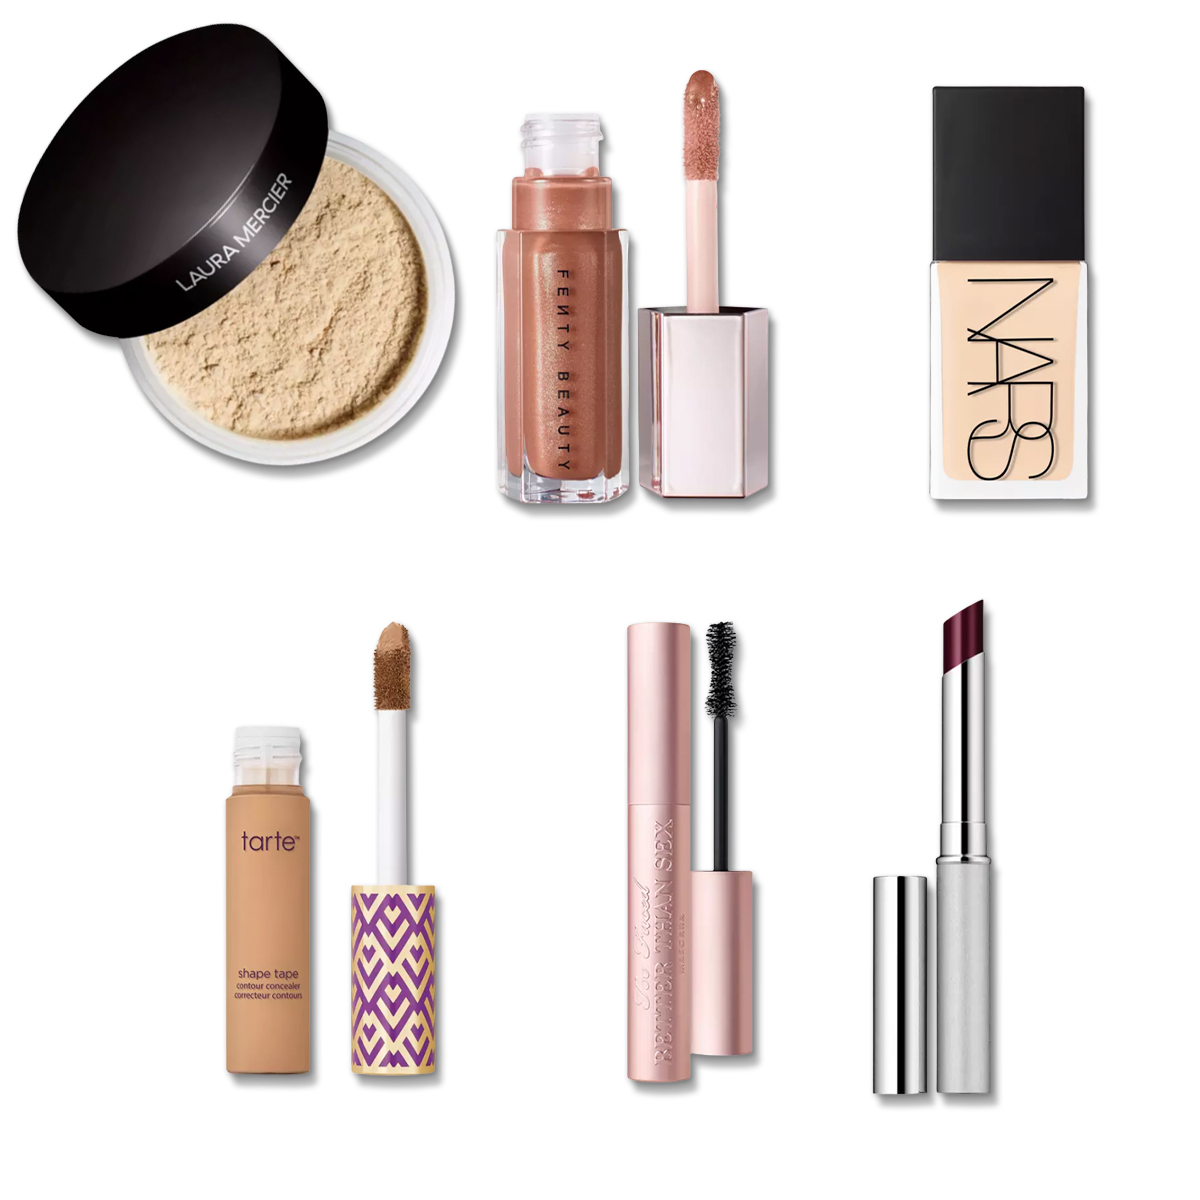 https://akns-images.eonline.com/eol_images/Entire_Site/2023128/rs_1200x1200-230228130113-under-100-ulta-finds-1.jpg?fit=around%7C1080:1080&output-quality=90&crop=1080:1080;center,top